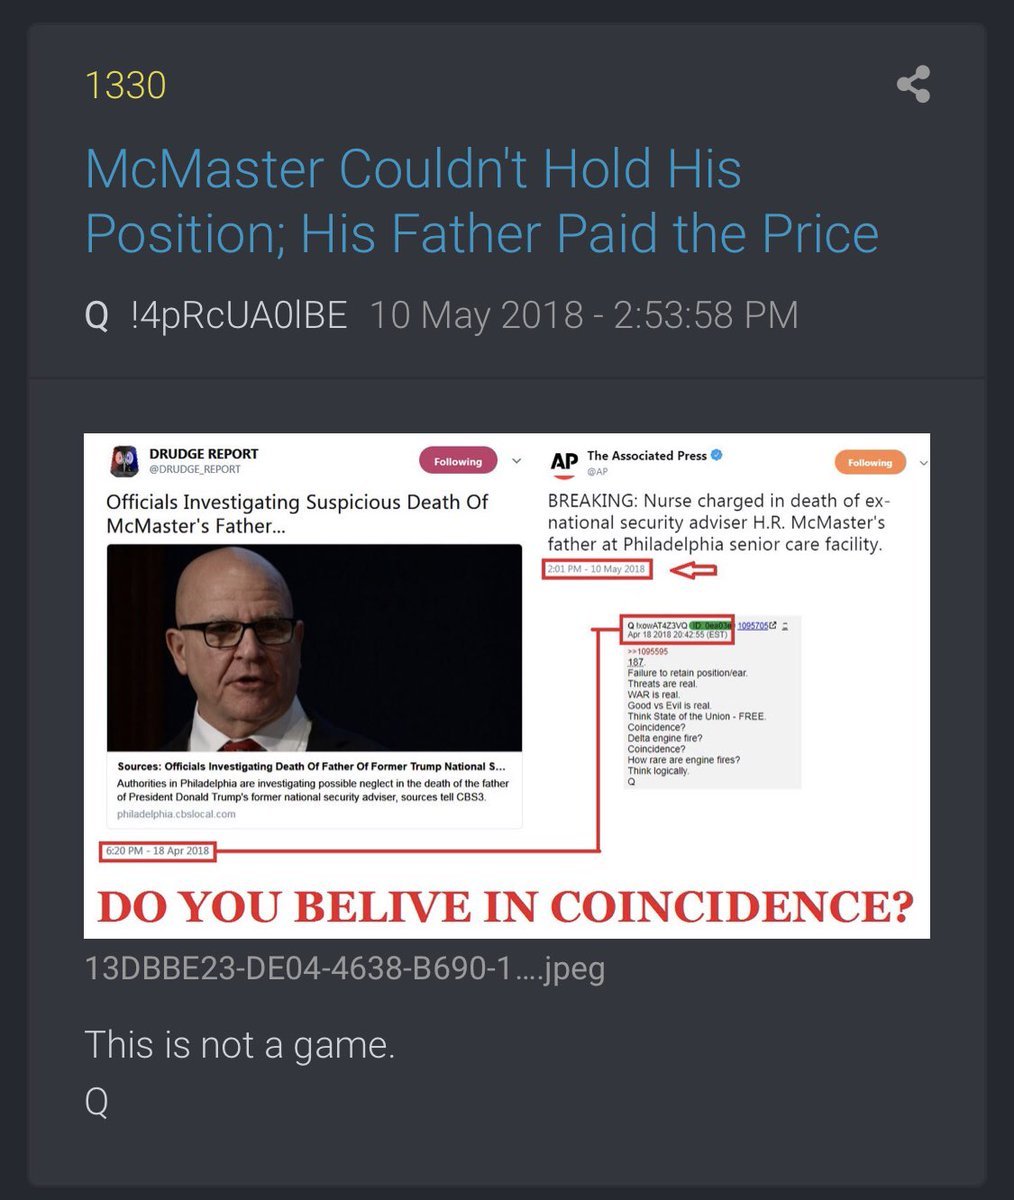 59. After Eric  #Ciaramella was fired, in June 2017, General McMaster hires him back as his own Executive Assistant! But, McMaster was finally put out.  #QAnon  #DeepStateCabal